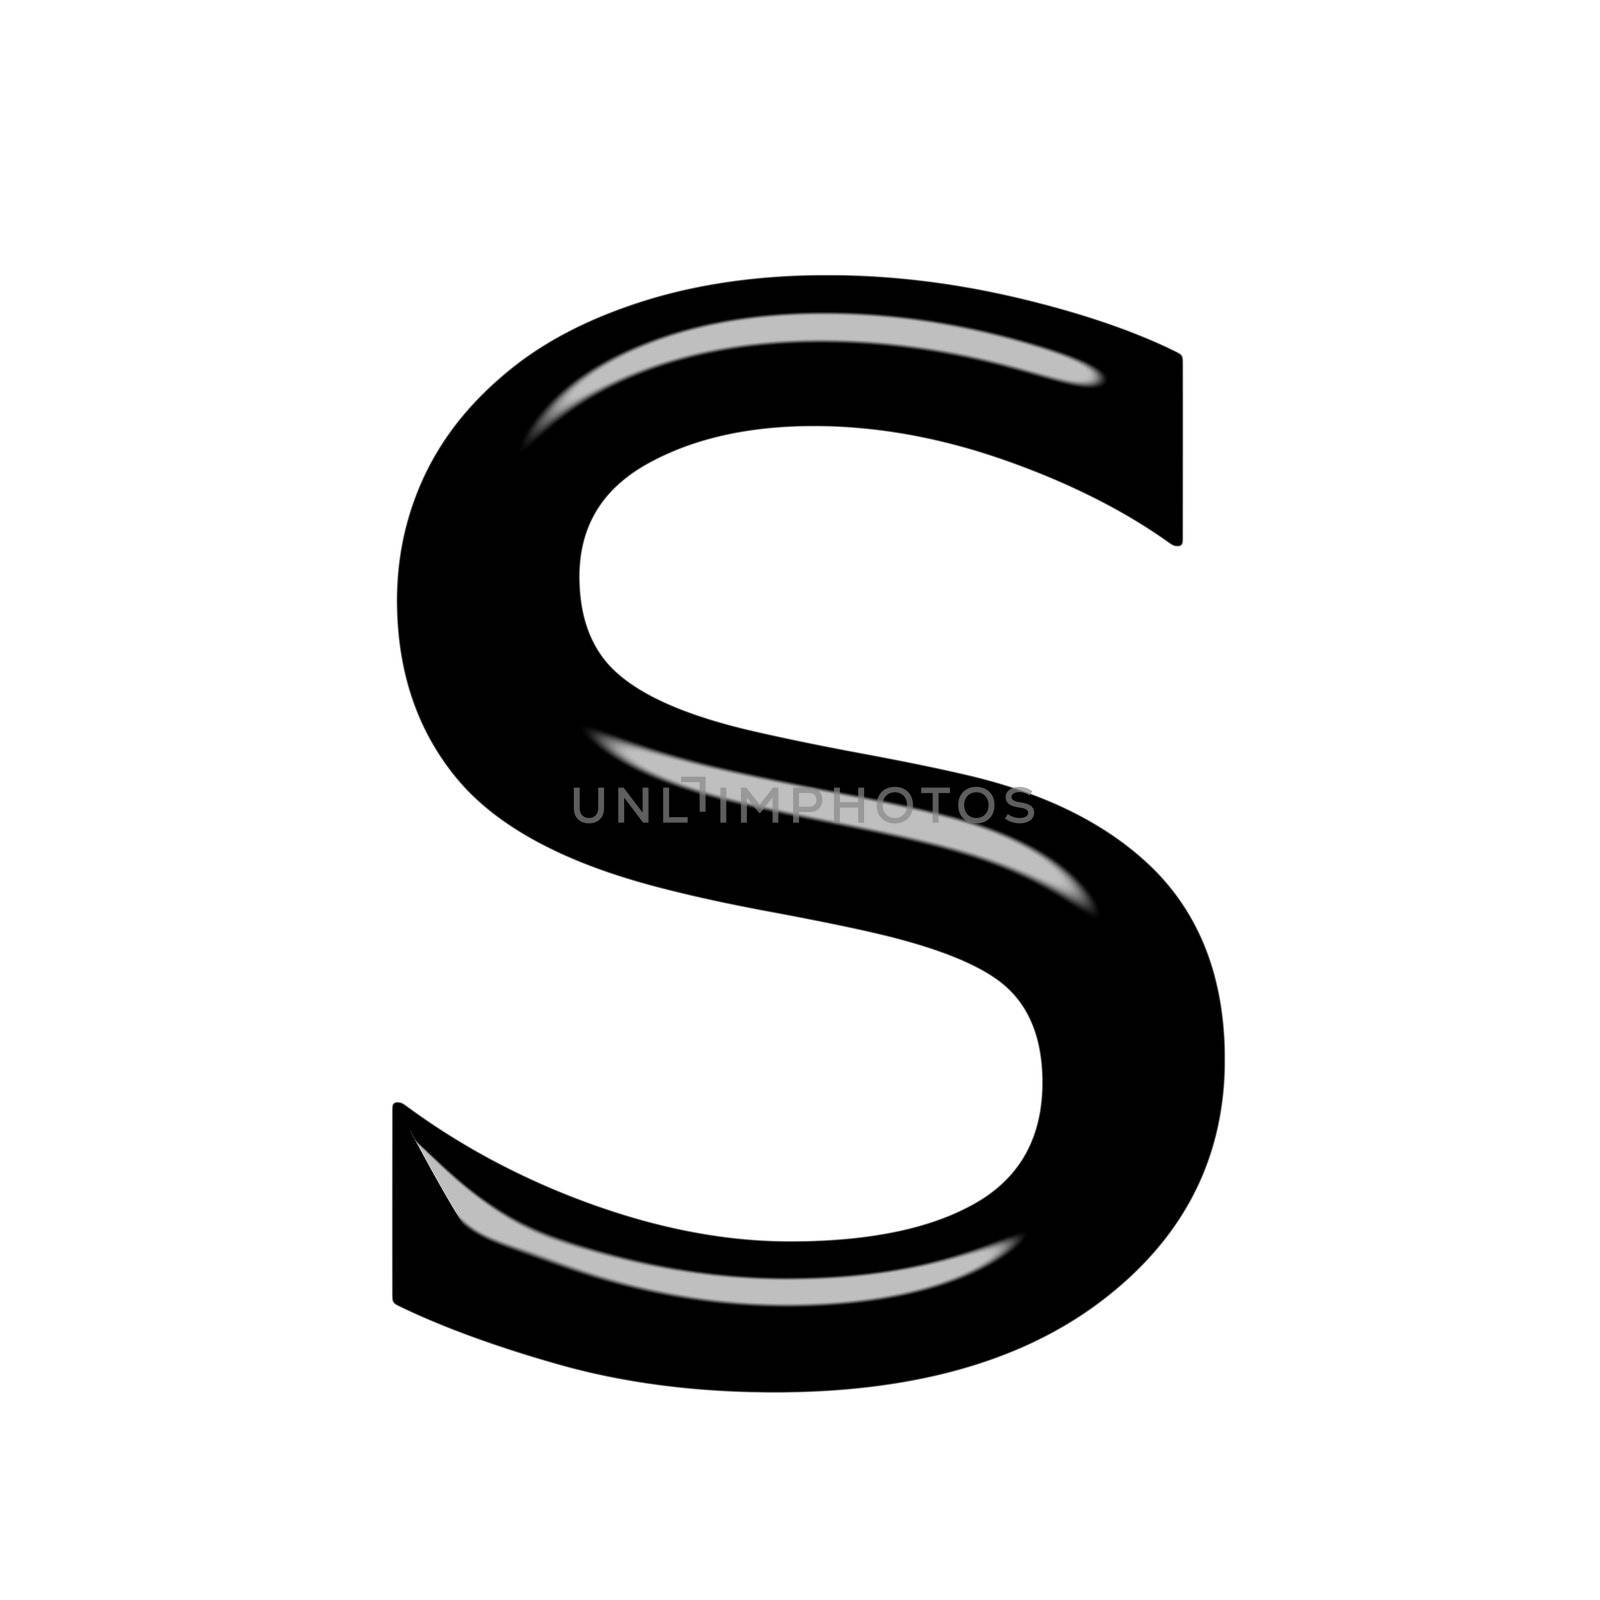 3d letter s isolated in white